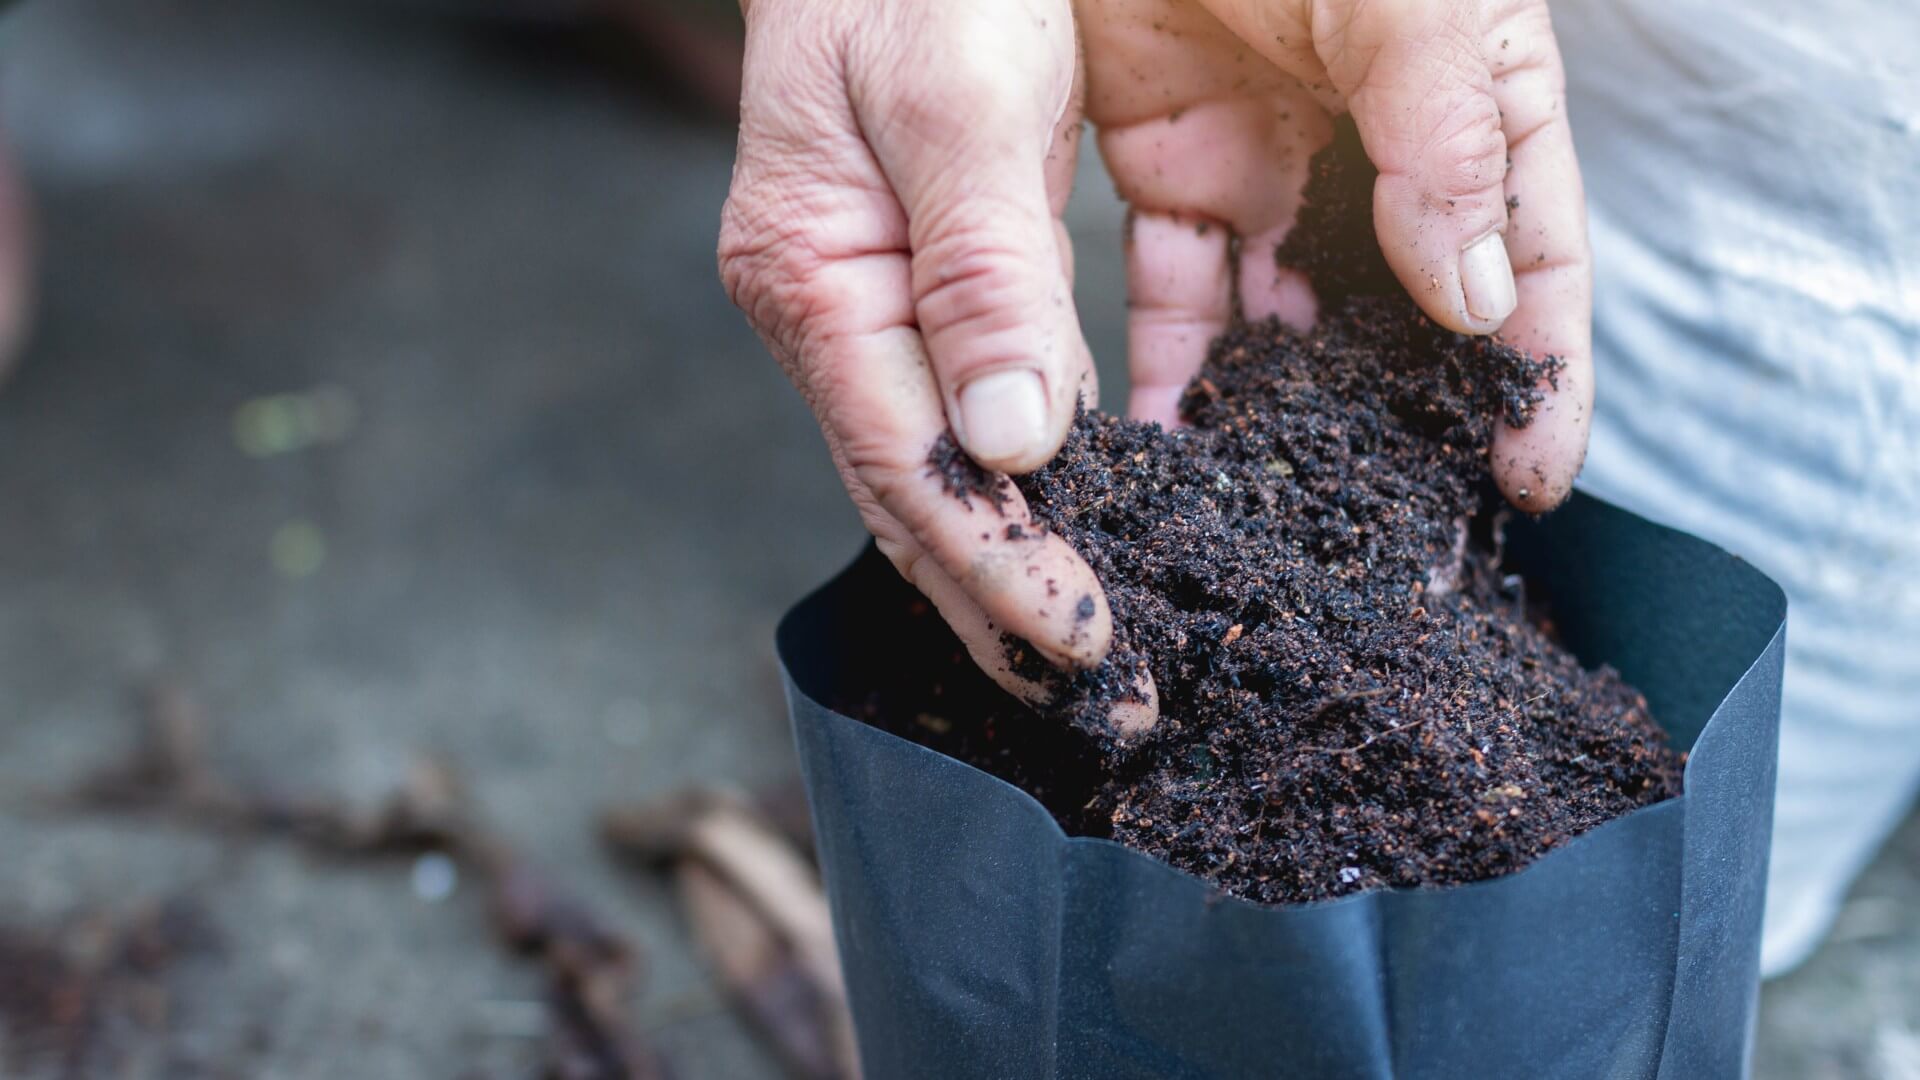 hands pouring soil into a grey fabric pot.